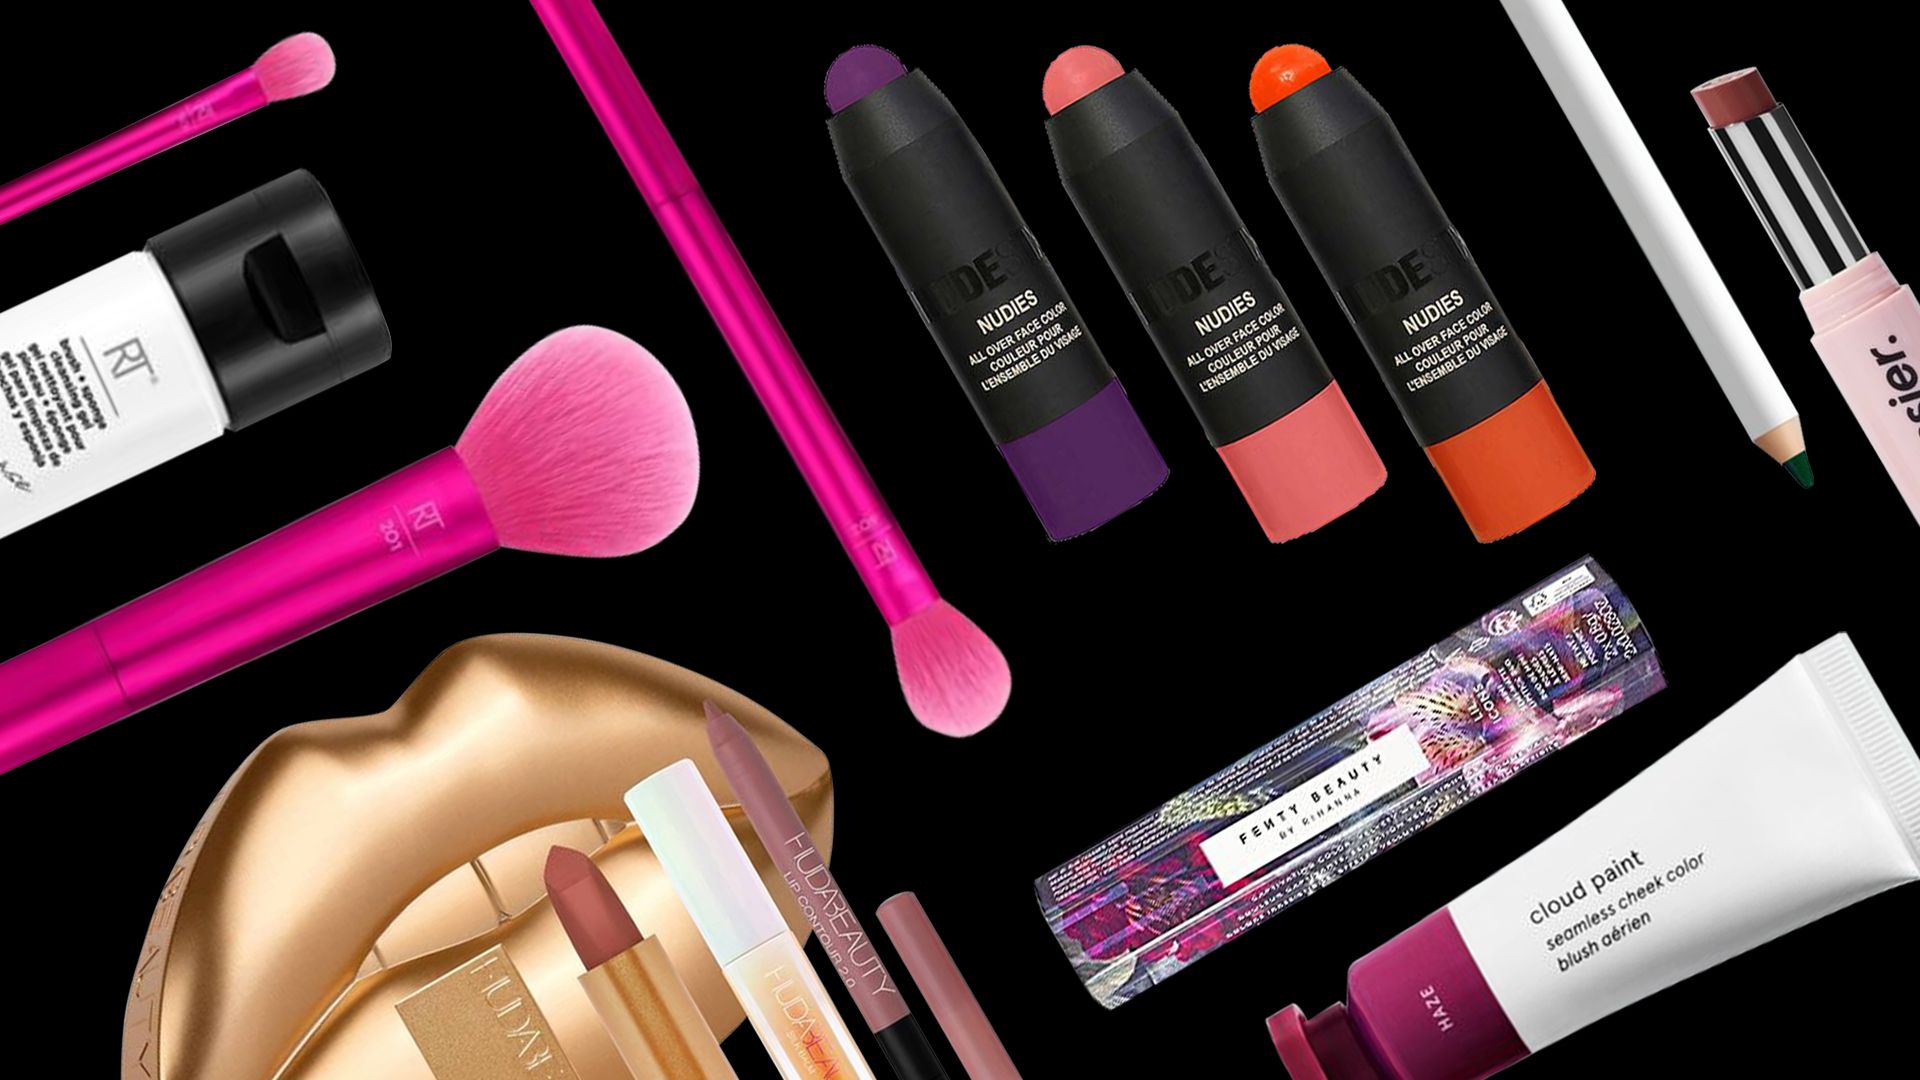 The Top 7 Picks for MAC Full Makeup Kit Price - Makeup Essentials You Need  to Have in Your Vanity